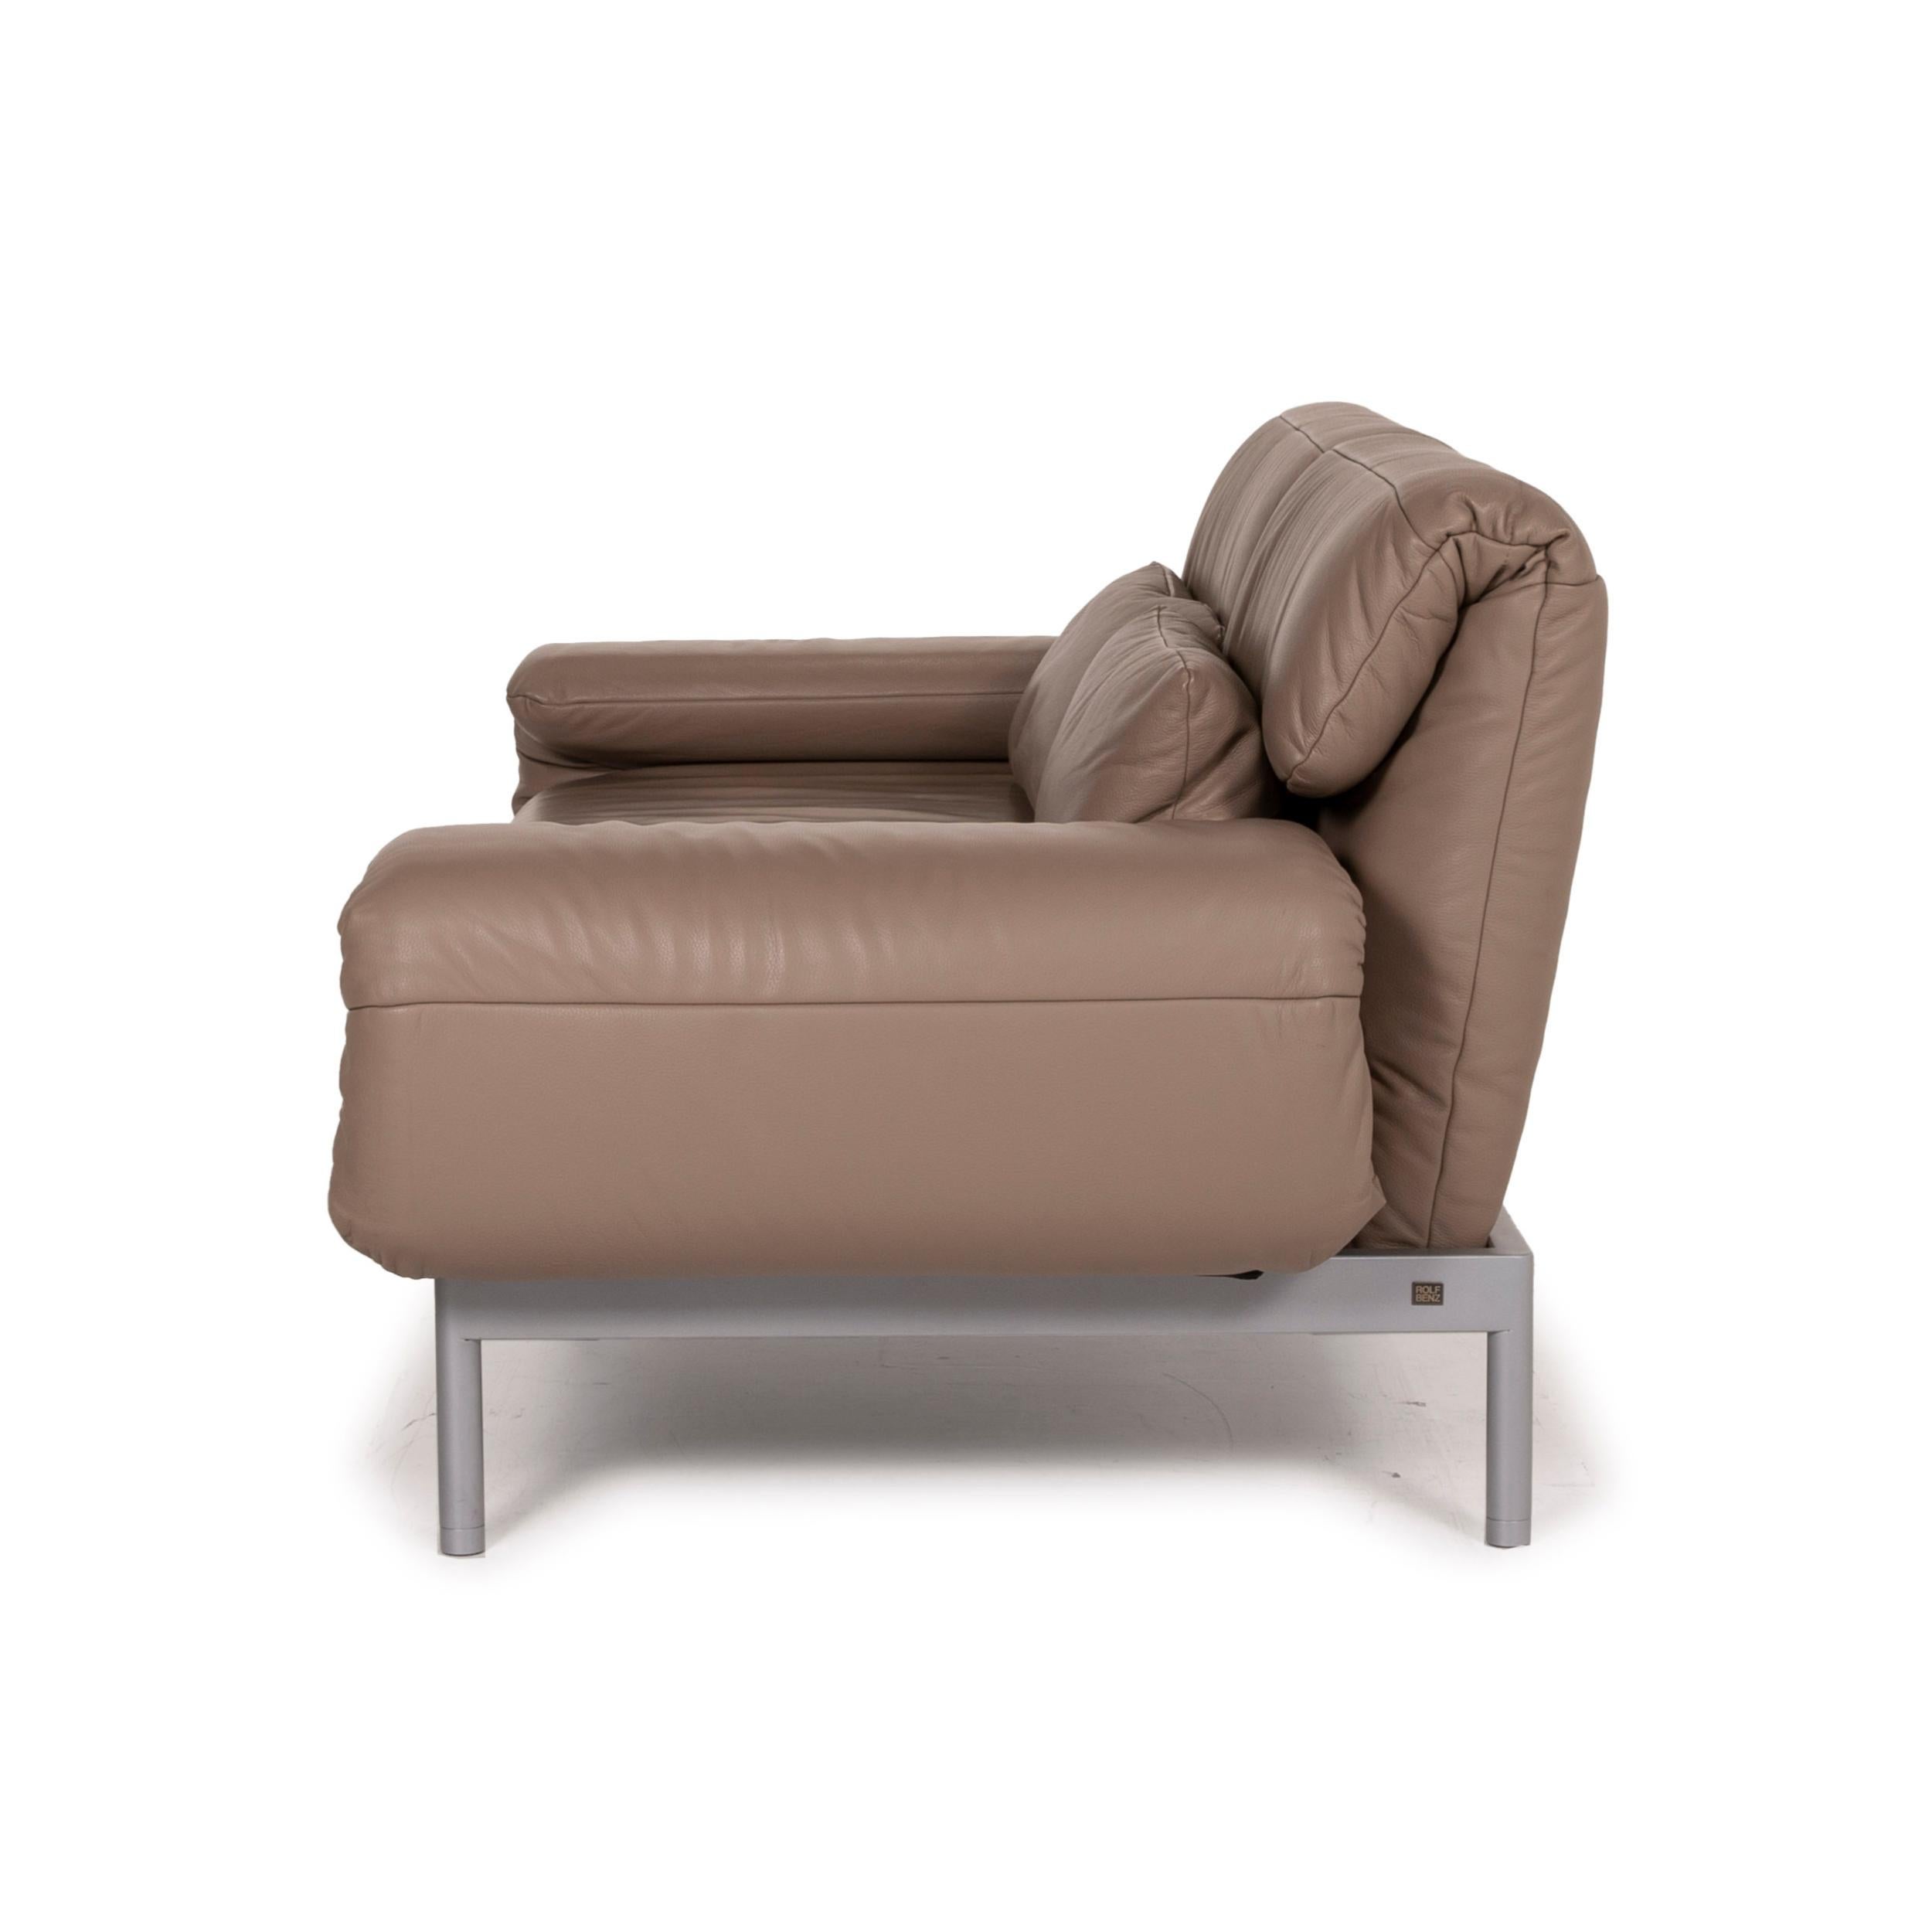 Rolf Benz Plura Leather Sofa Brown Two-Seater Function Reclining Function 6